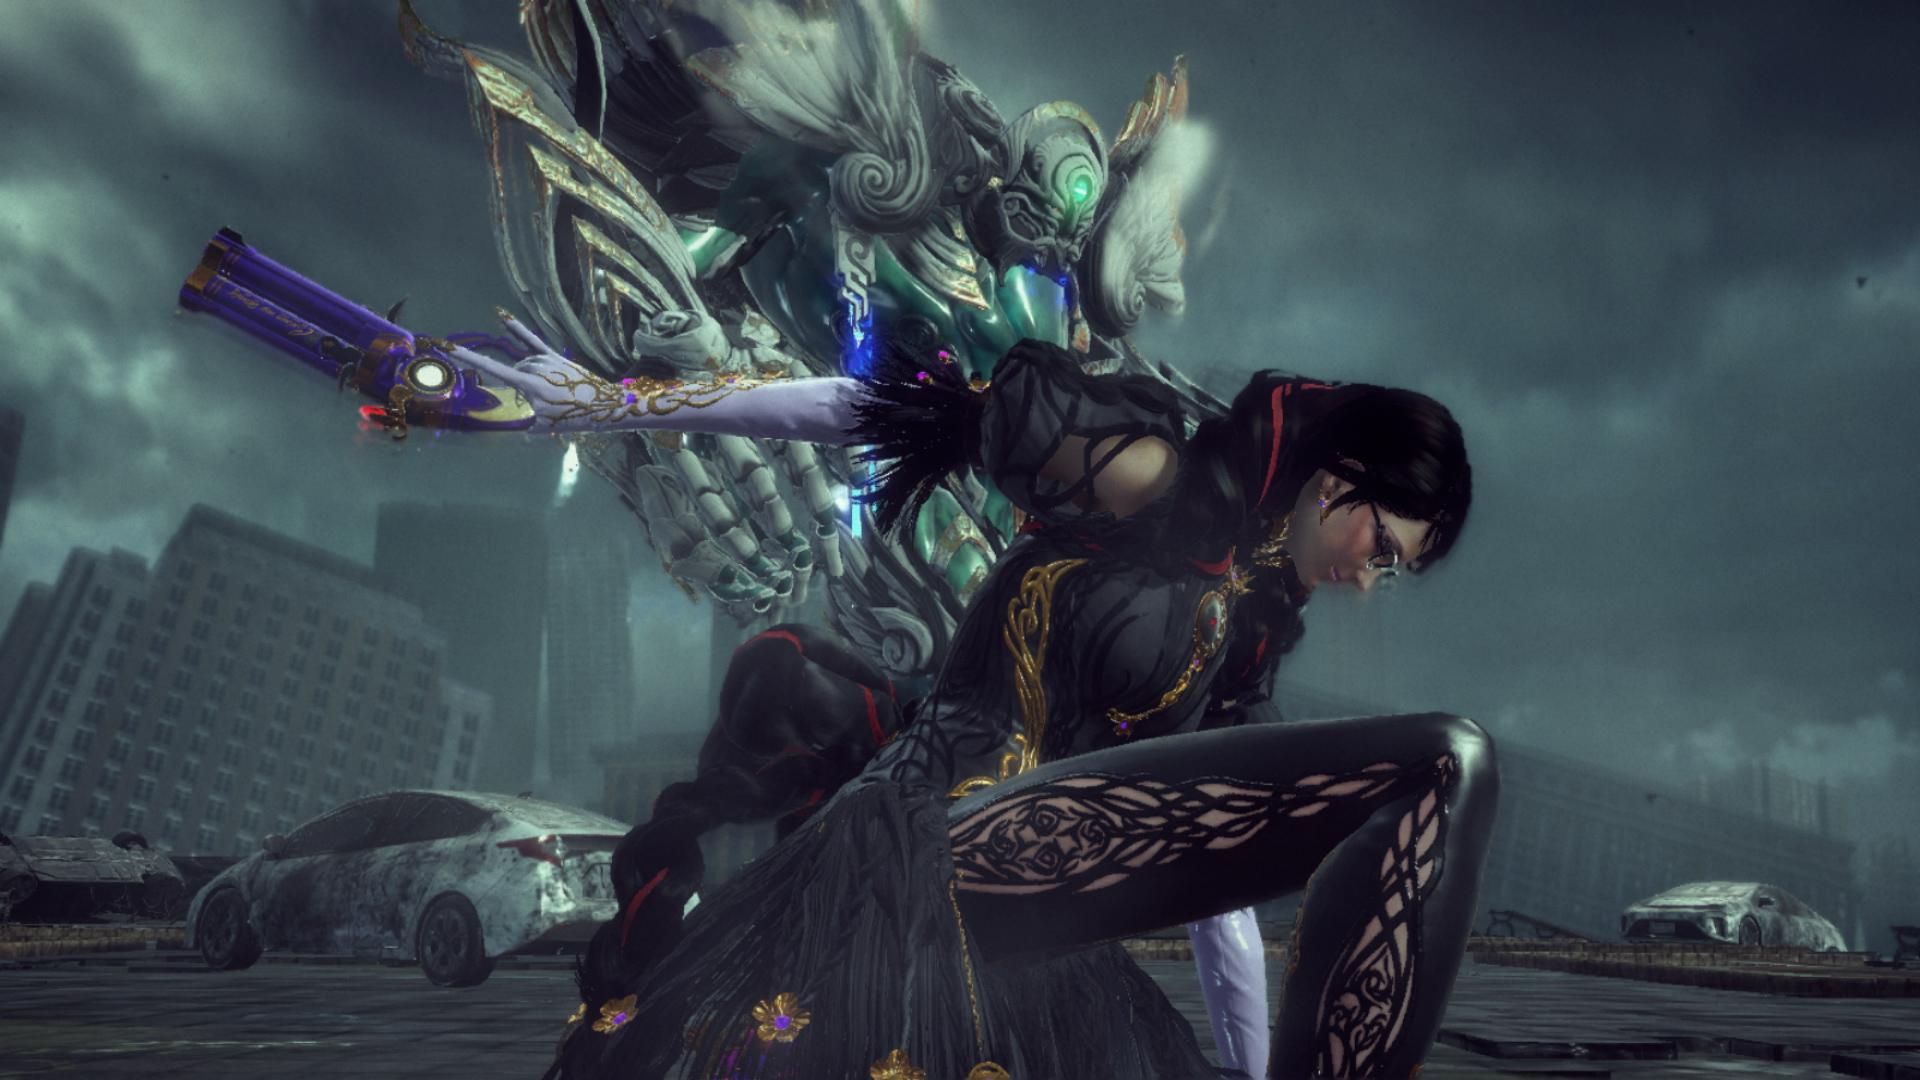 How to Save Your Game in Bayonetta 3